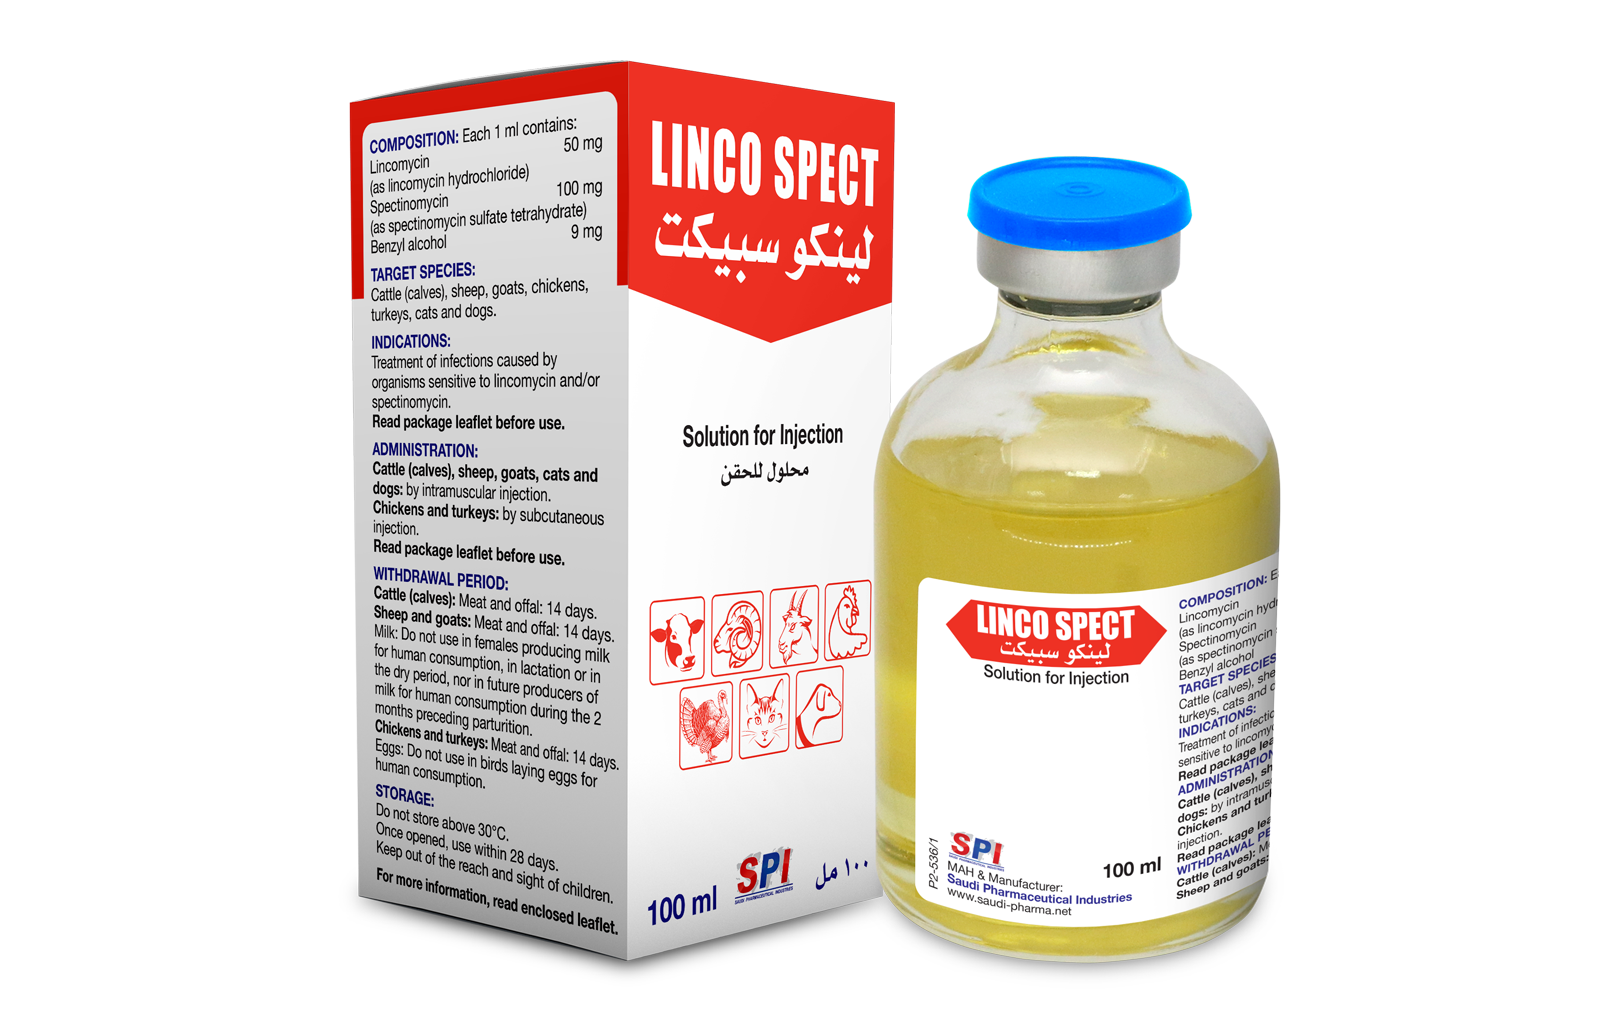 Linco Spect Solution for Injection (100 ml)